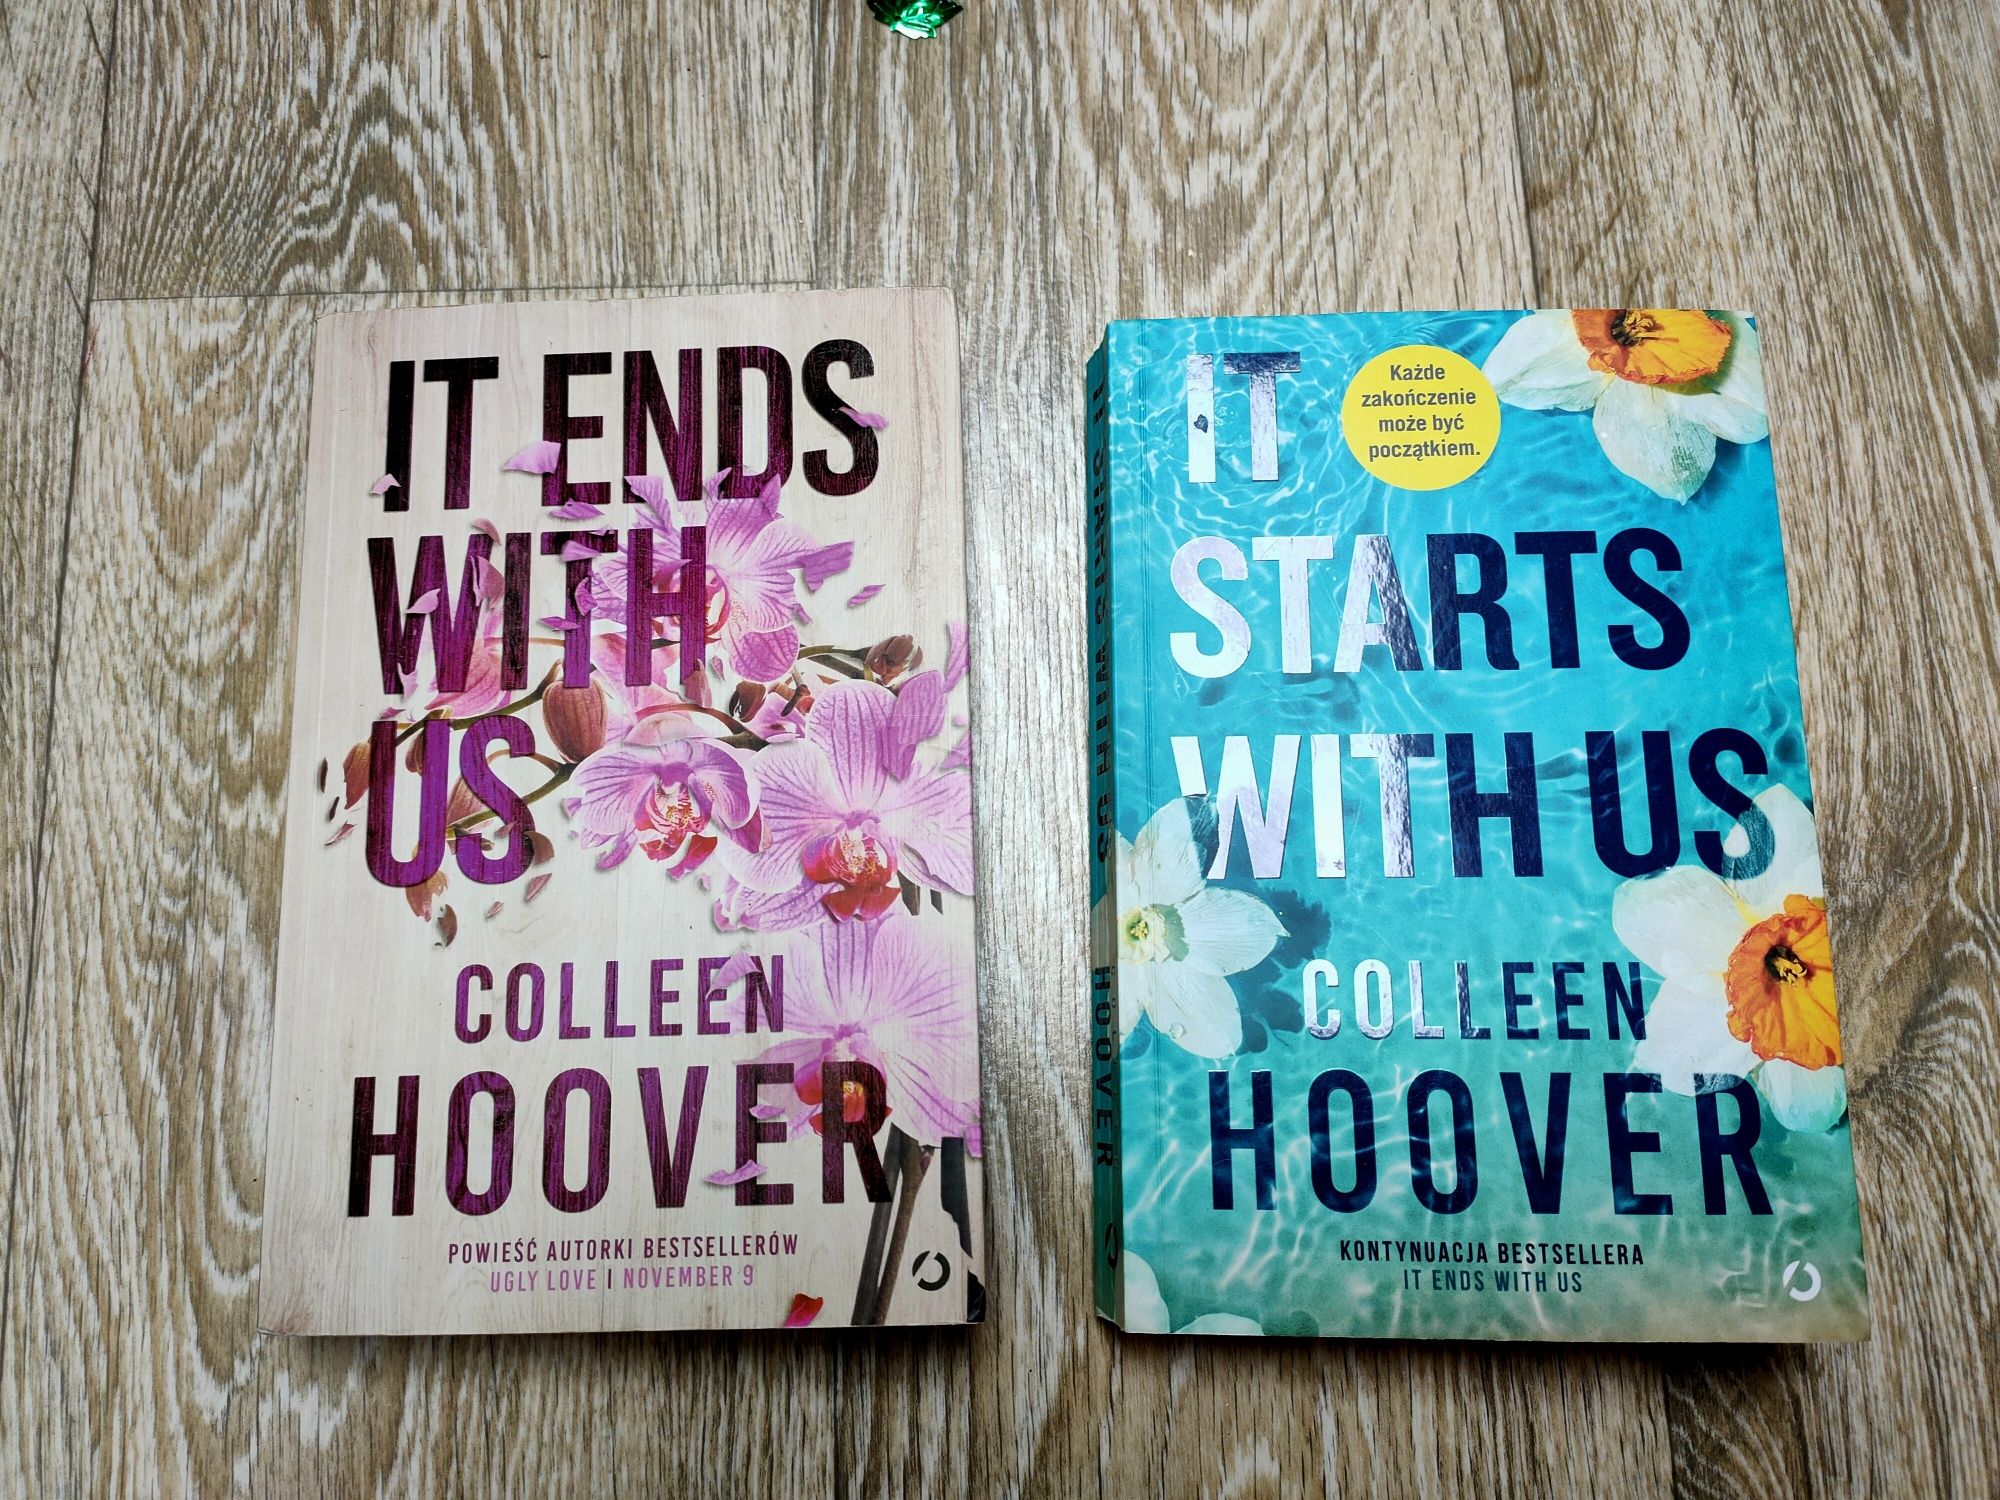 IT ends with us Colleen Hoover książka